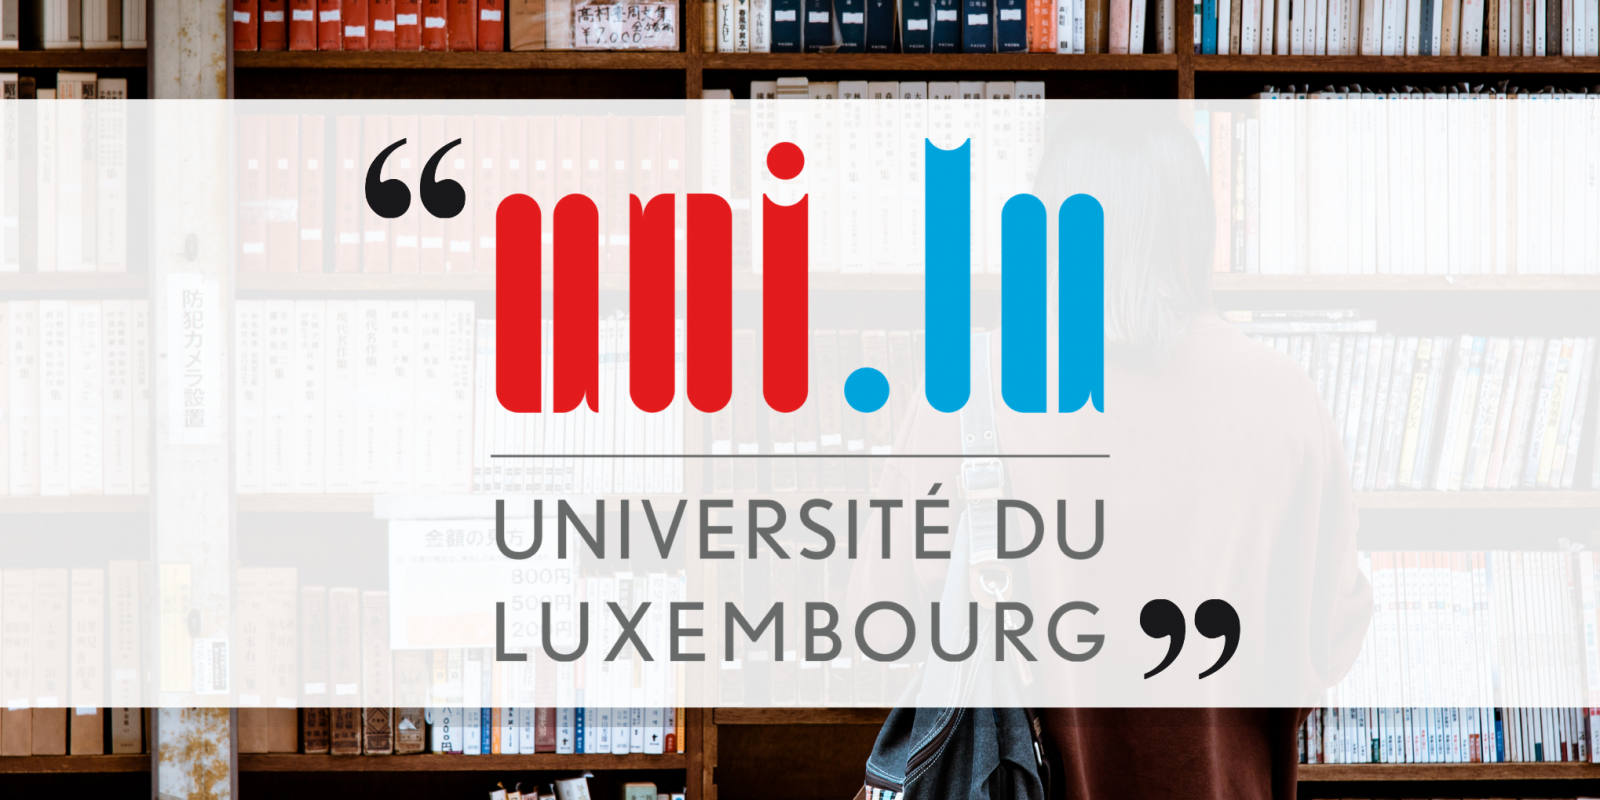 Numen Europe and Labgroup are supporting the University of Luxembourg in its digital transformation